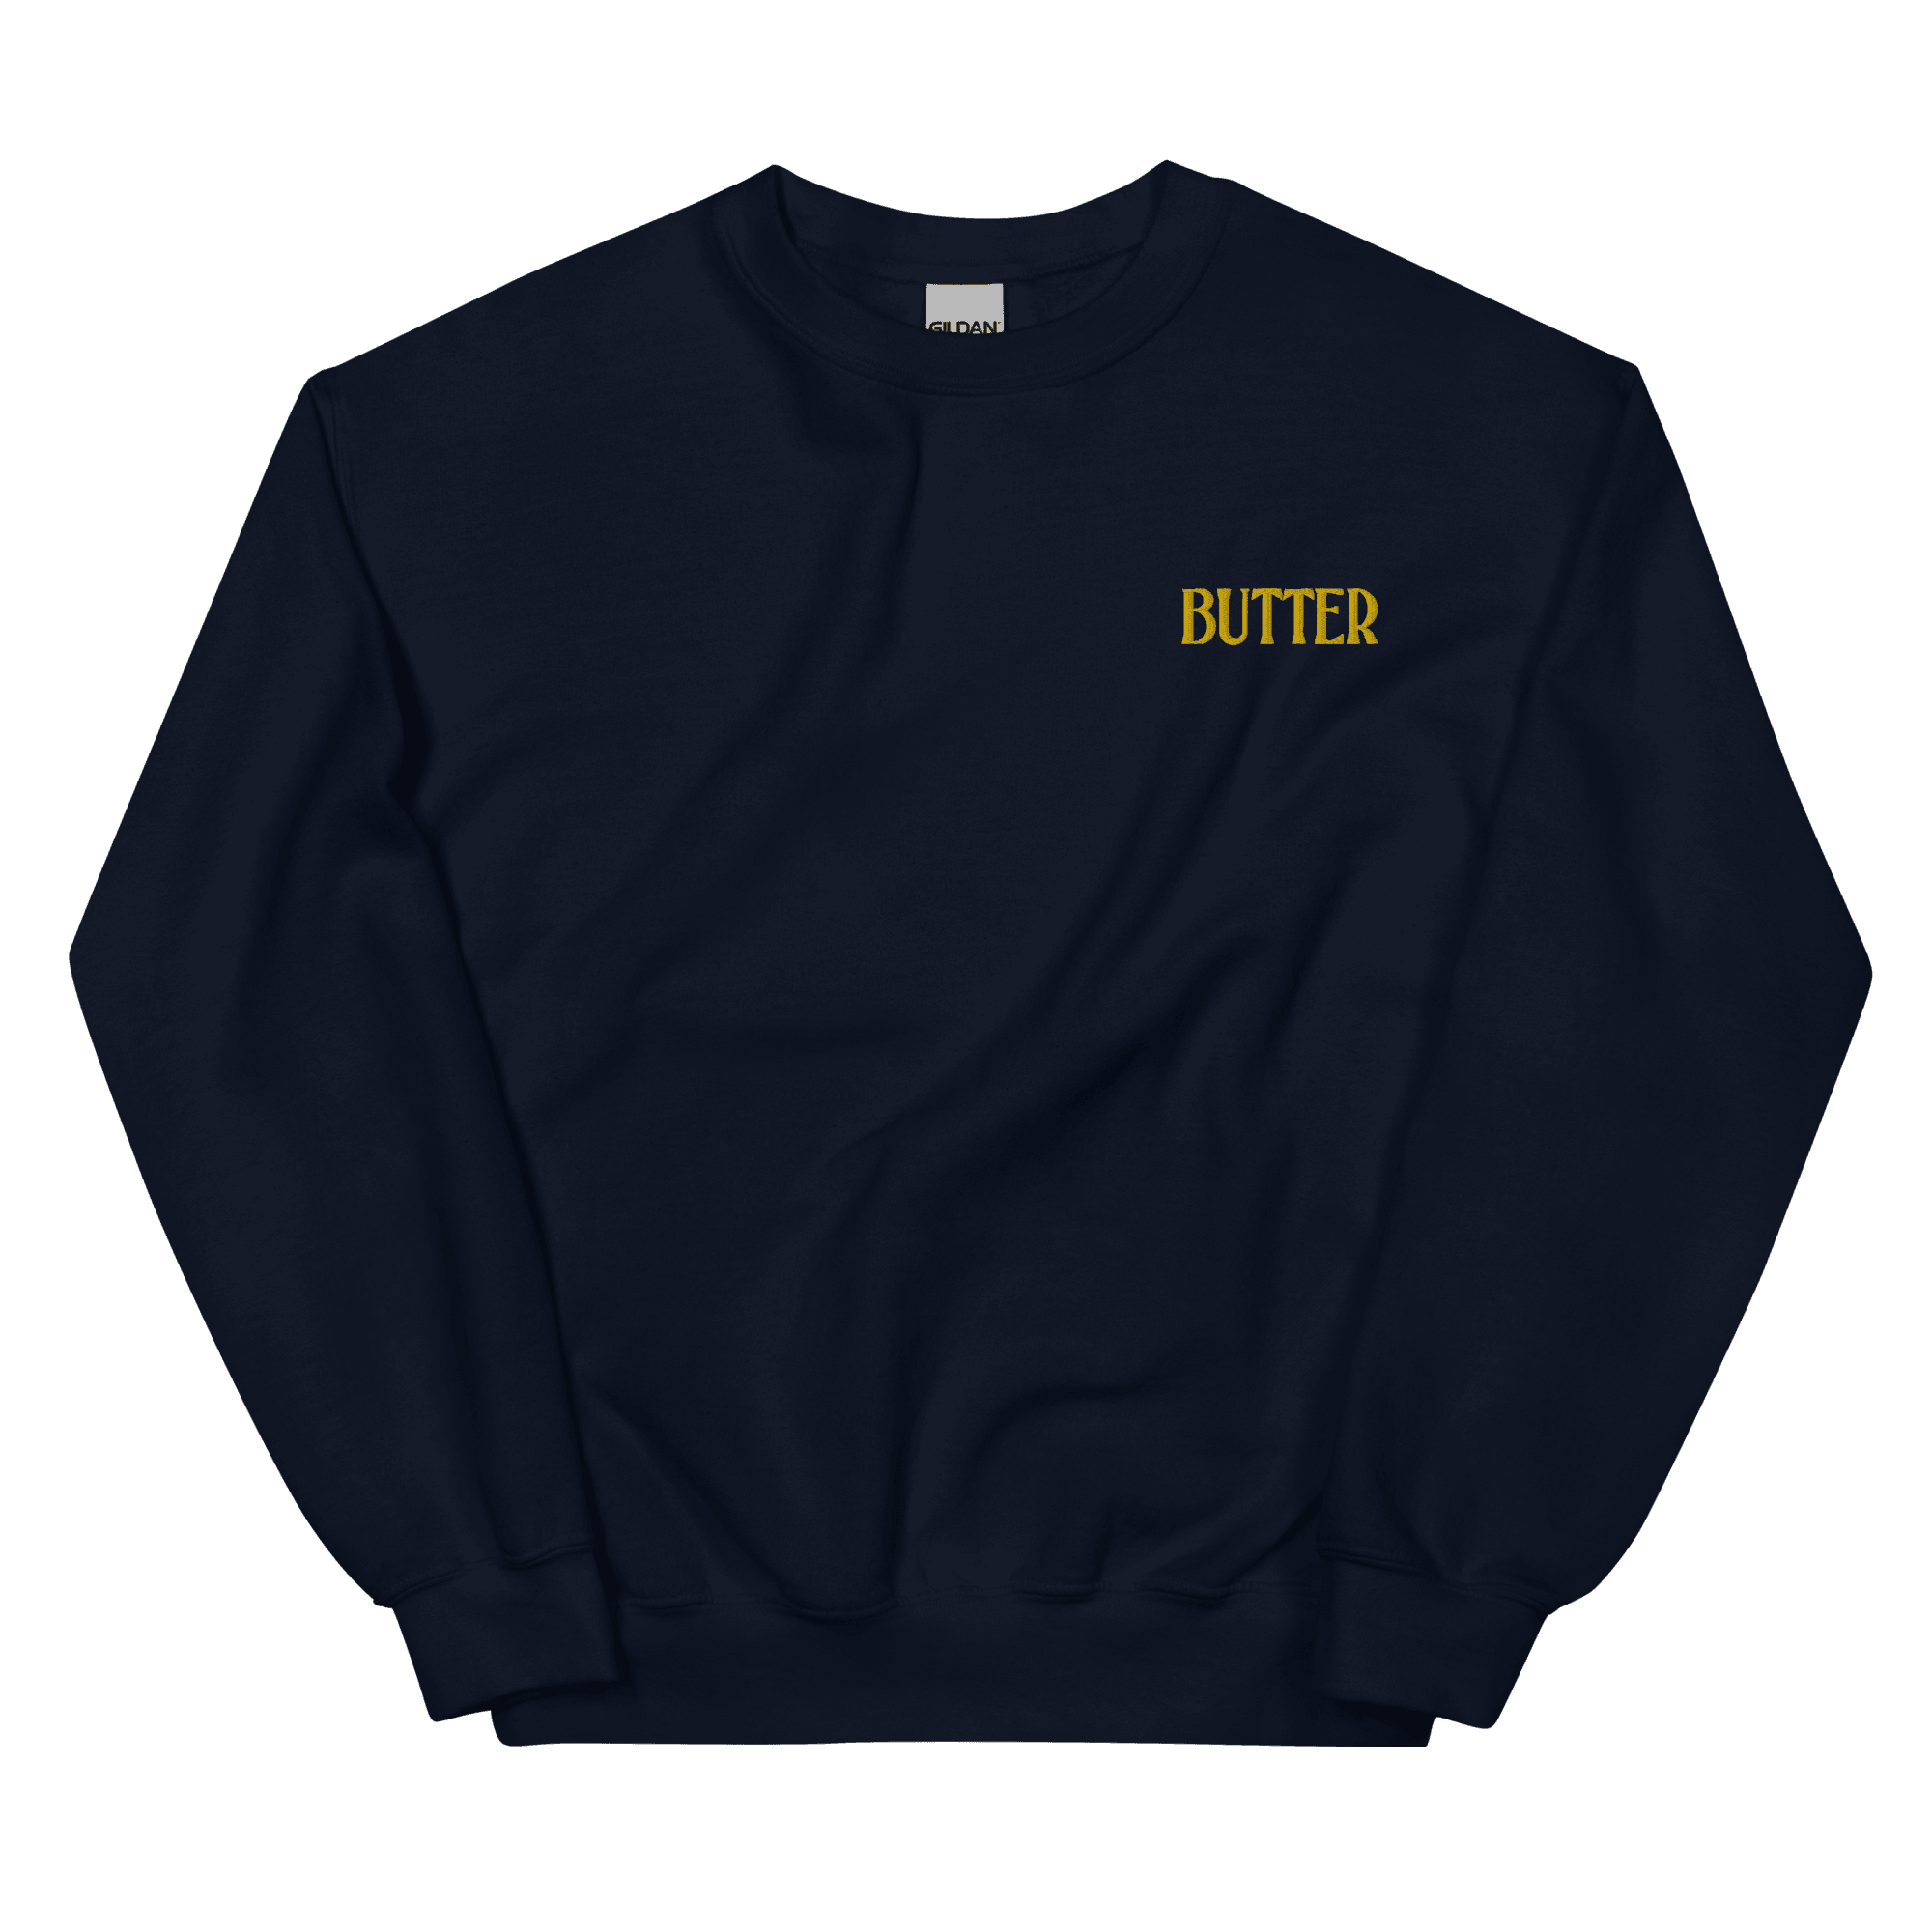 BUTTER Embroidered Sweatshirt - Polychrome Goods 🍊